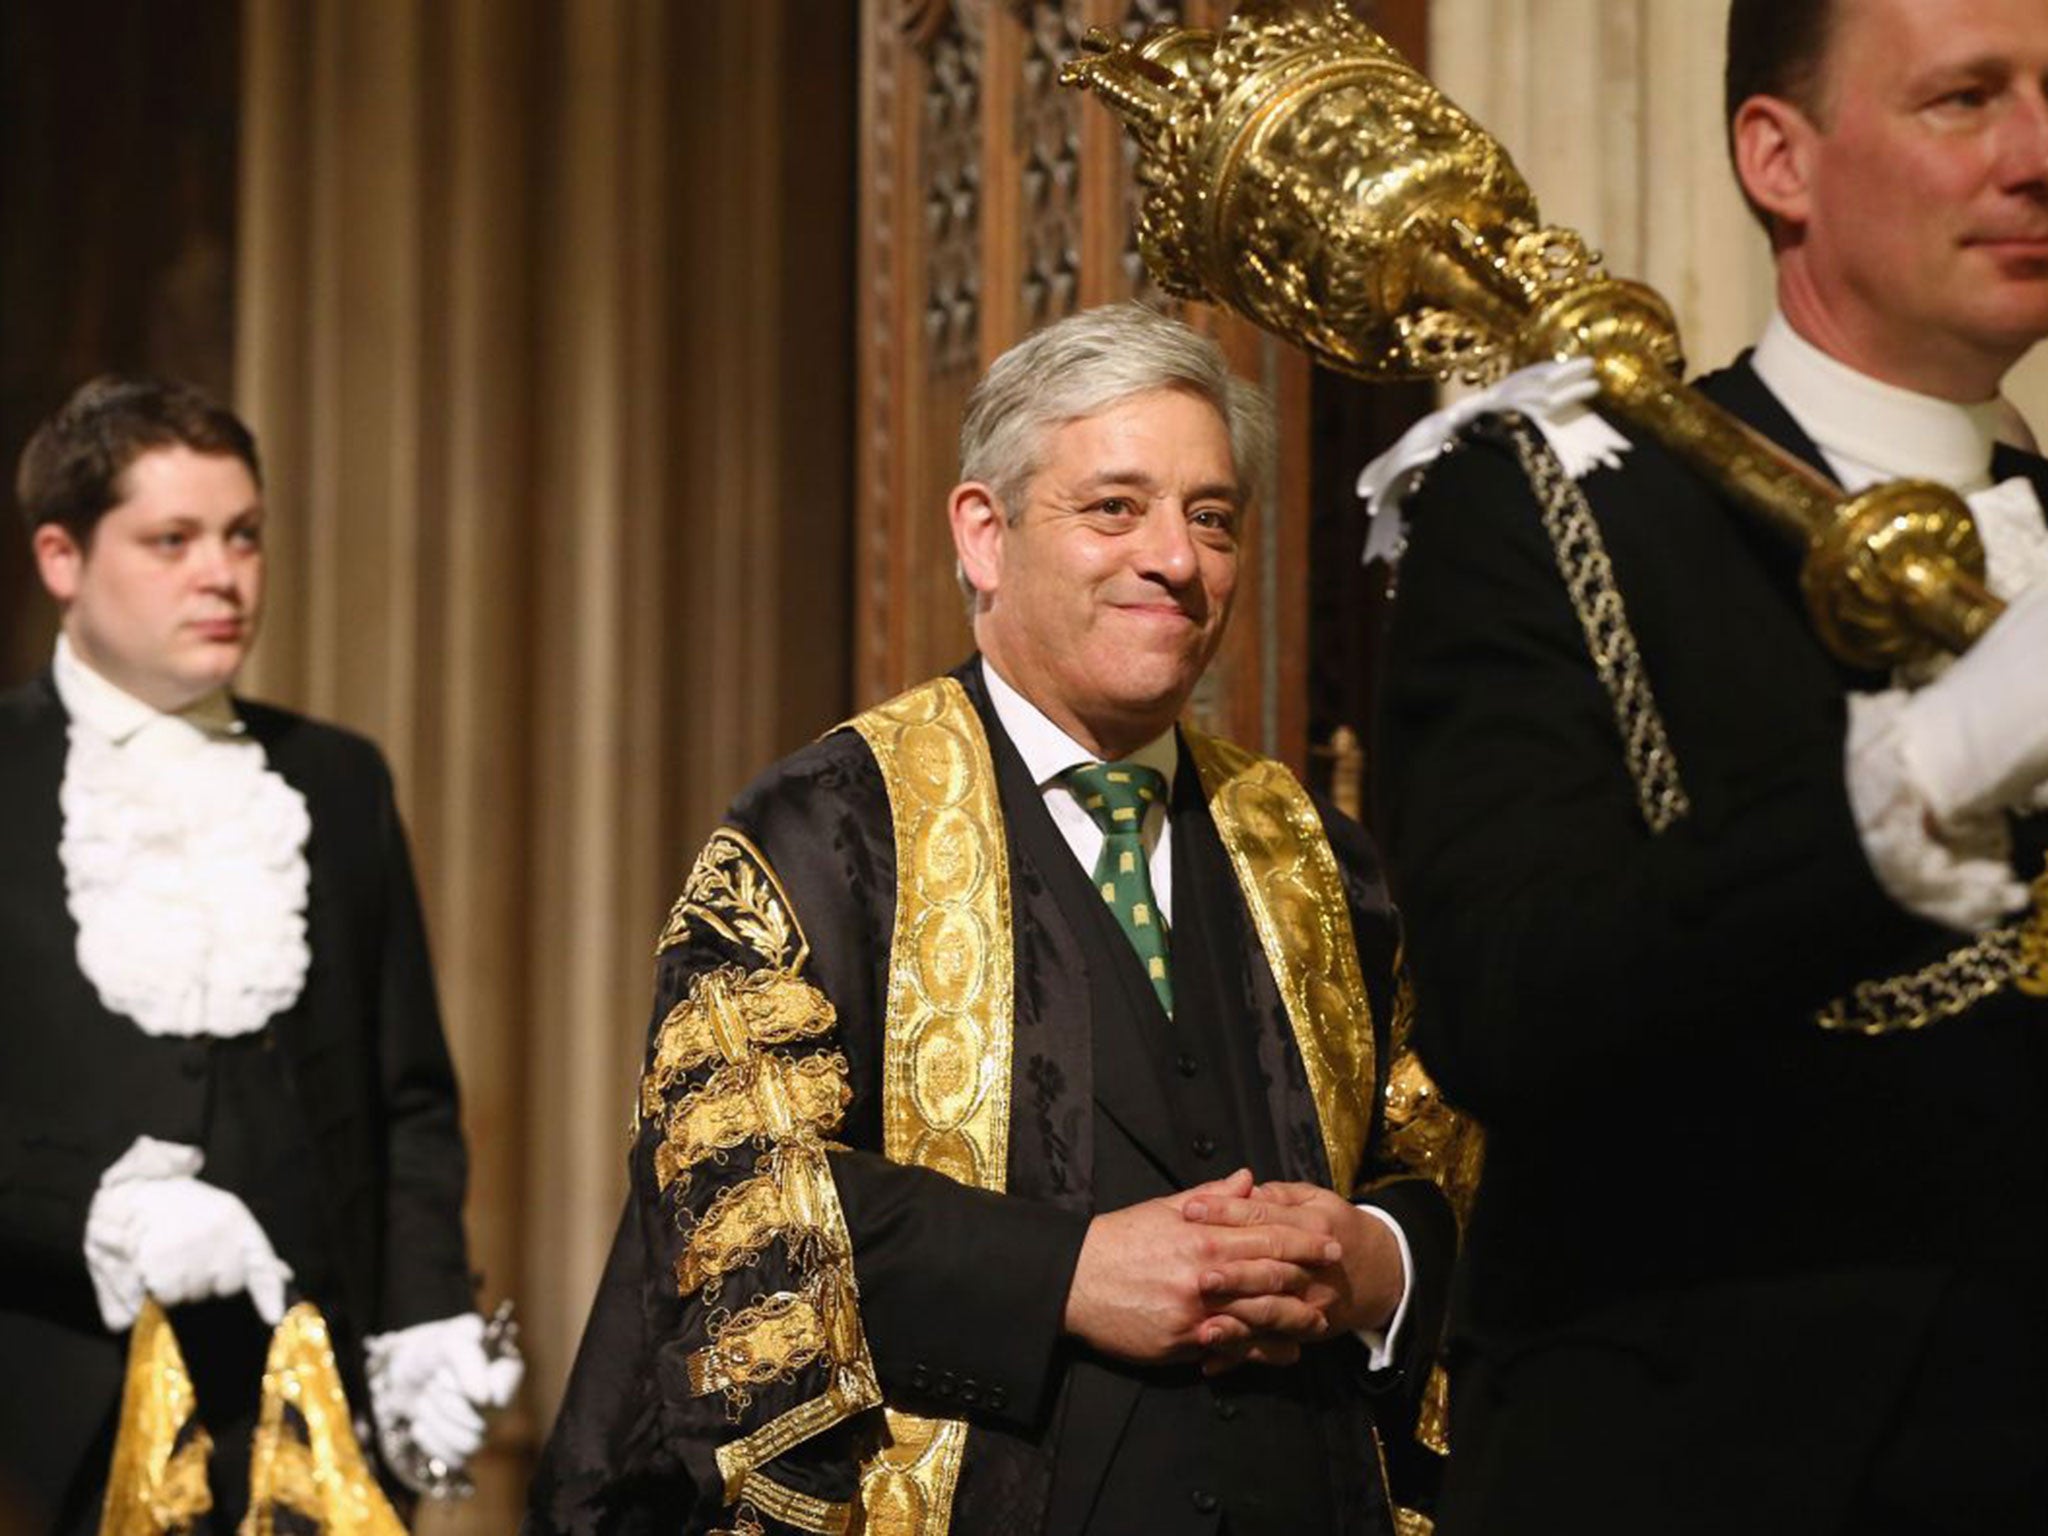 John Bercow walks through the Members' Lobby after the Queen's Speech at the State Opening of Parliament